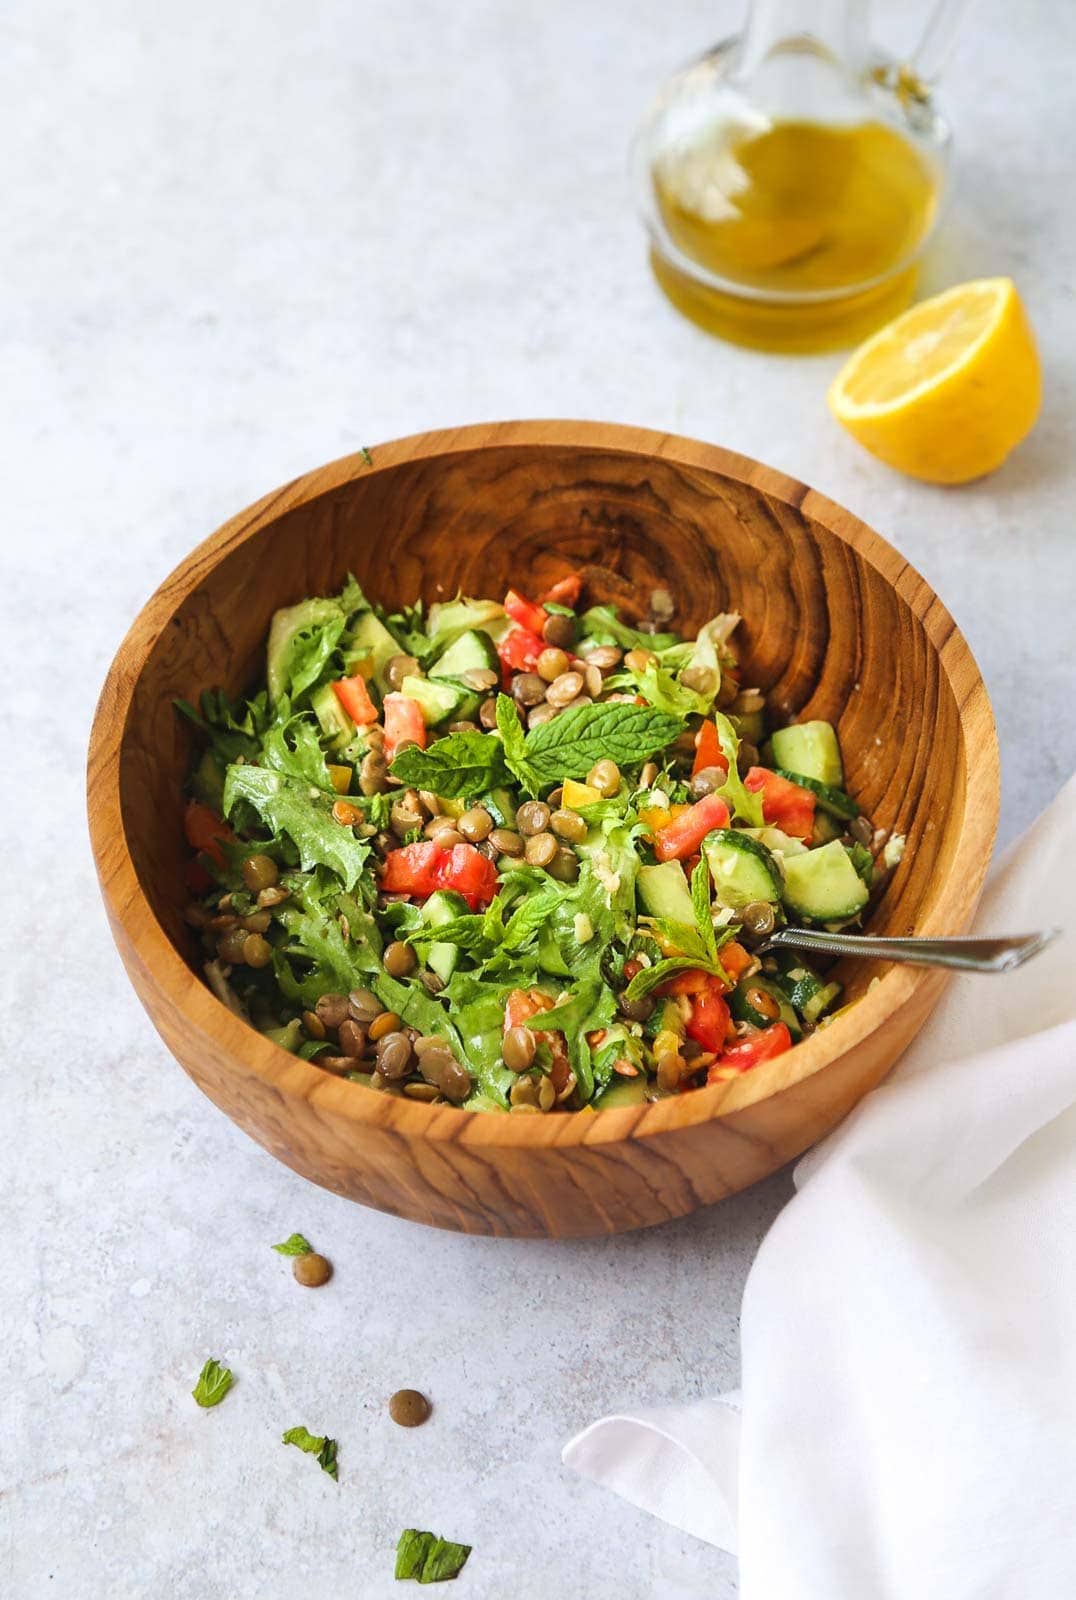 This lentil salad is refreshing, nourishing, filling and packed with lots of vitamins and plant protein.